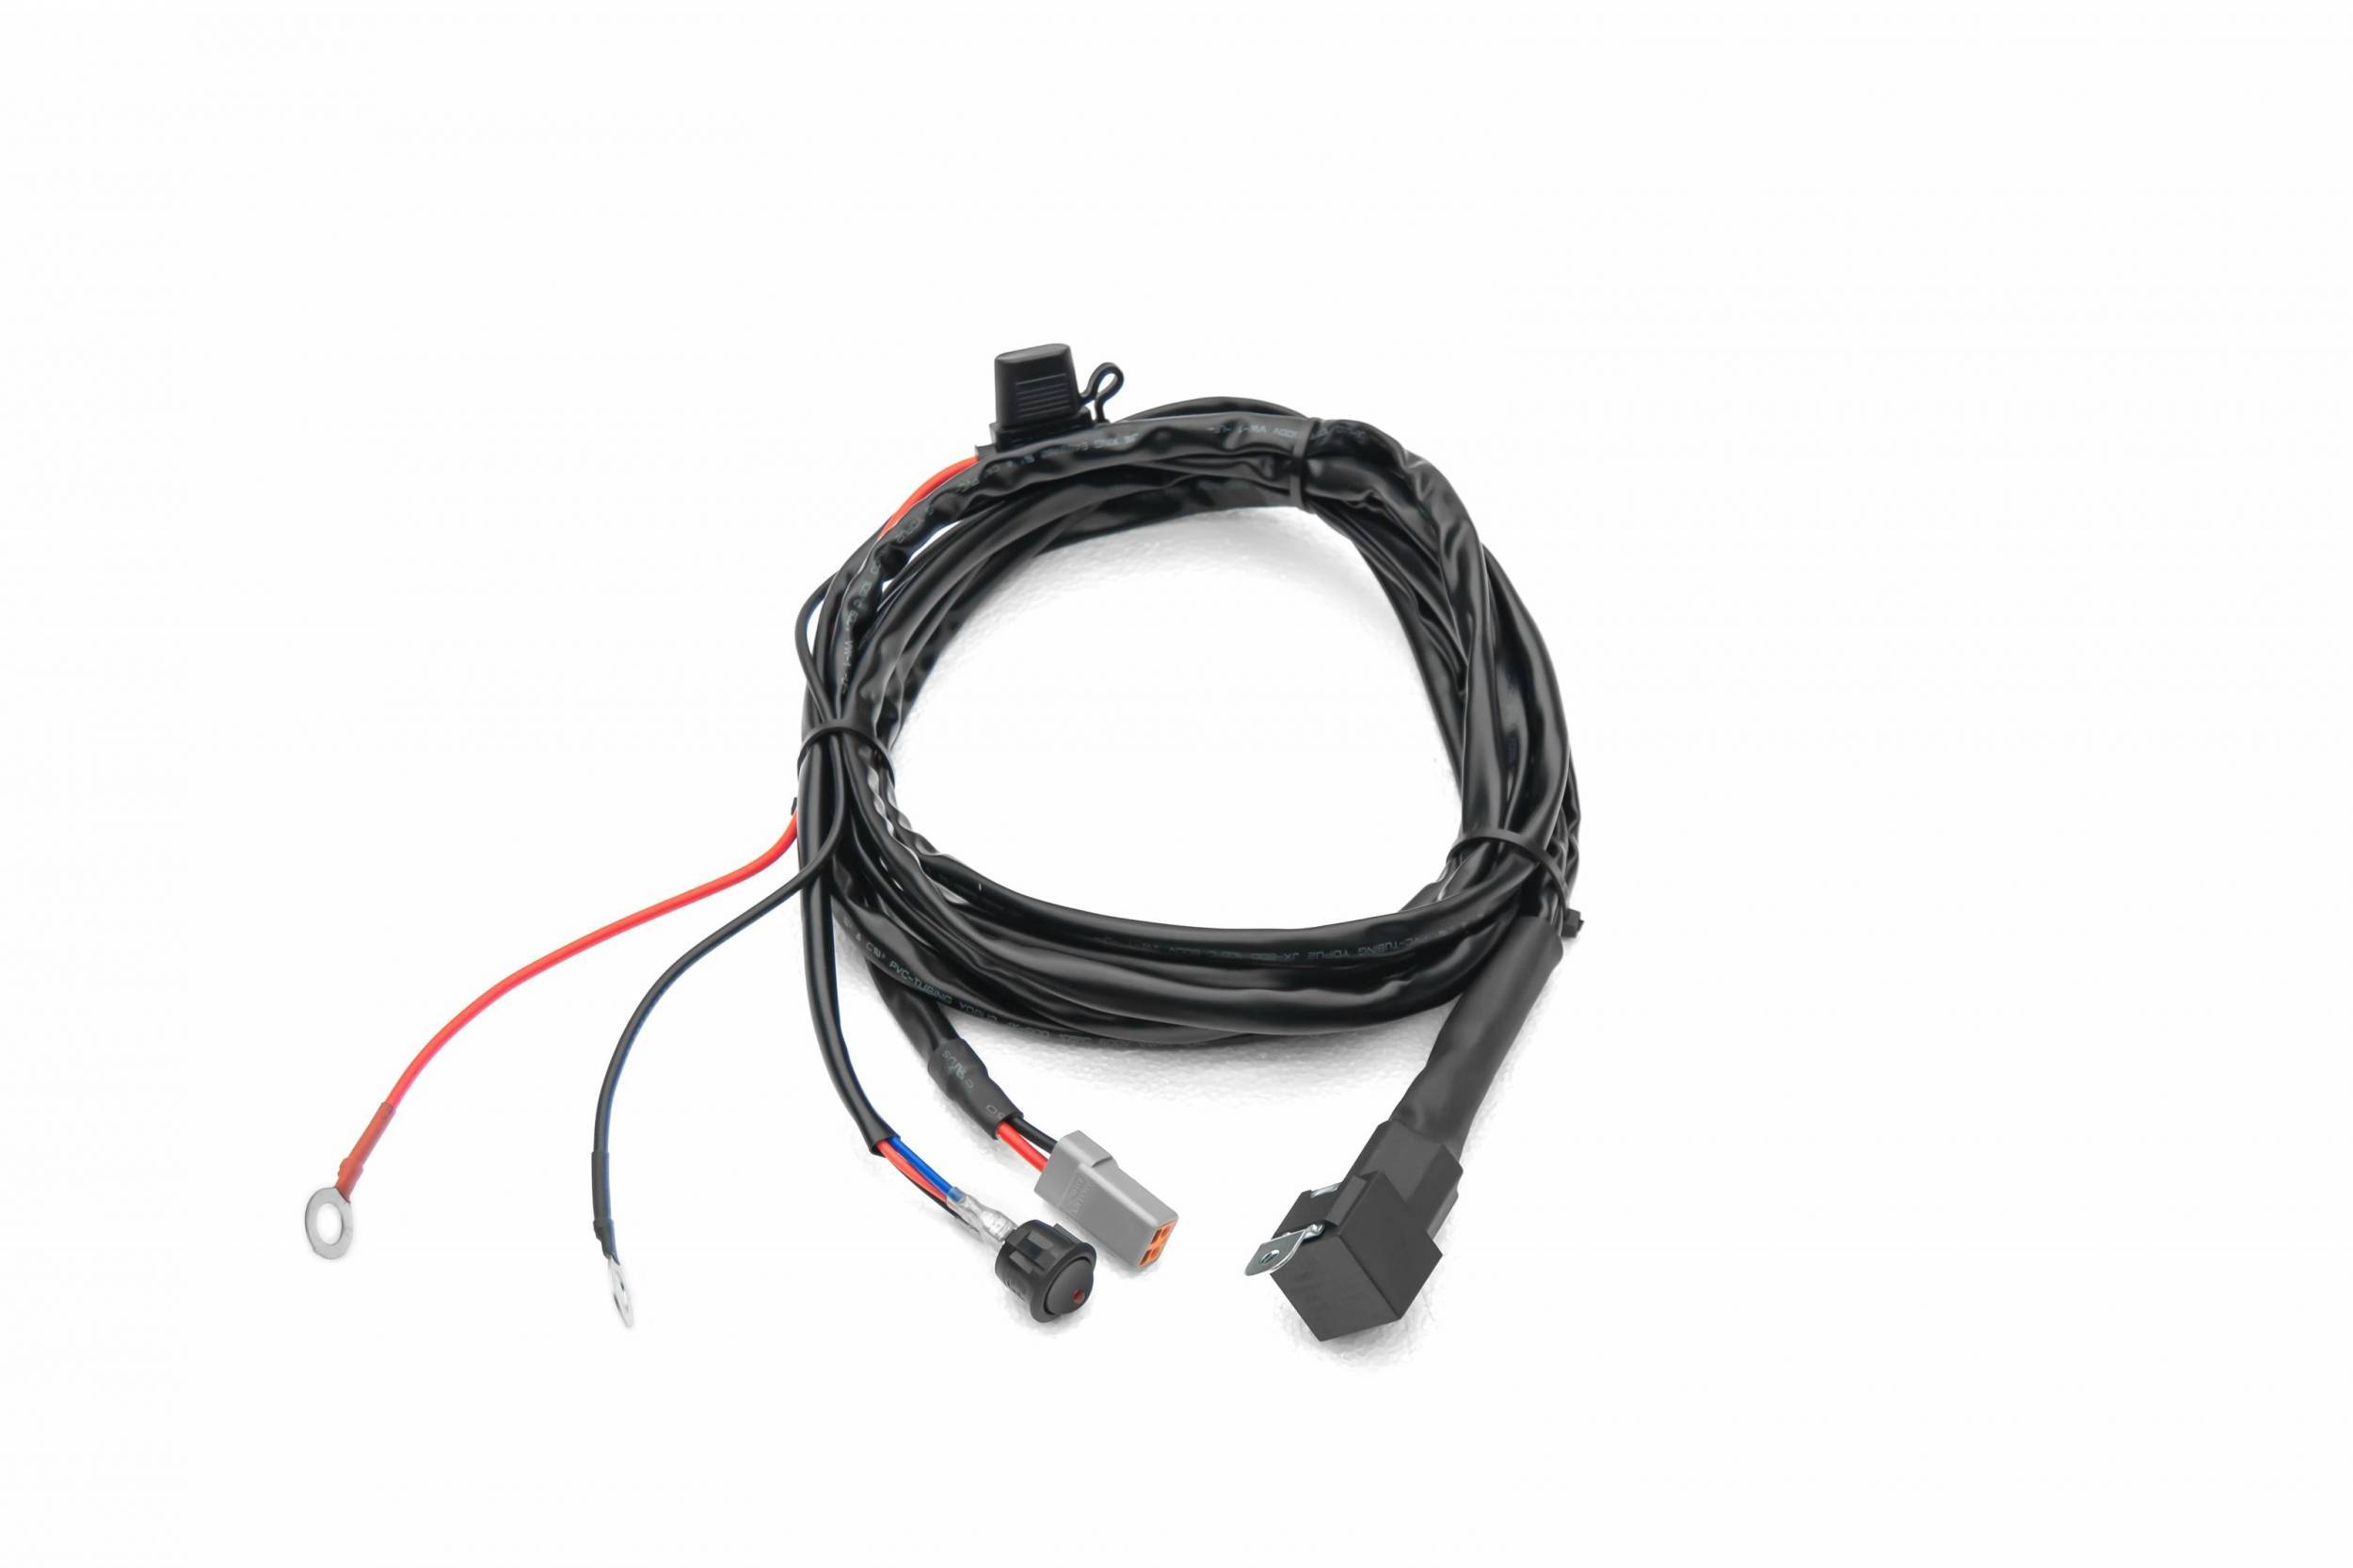 ZROADZ OFF ROAD PRODUCTS - Universal 9 FT DTC Wiring Harness to connect 1 LED Light Bar, 200 Watt or above - PN #Z390020S-B